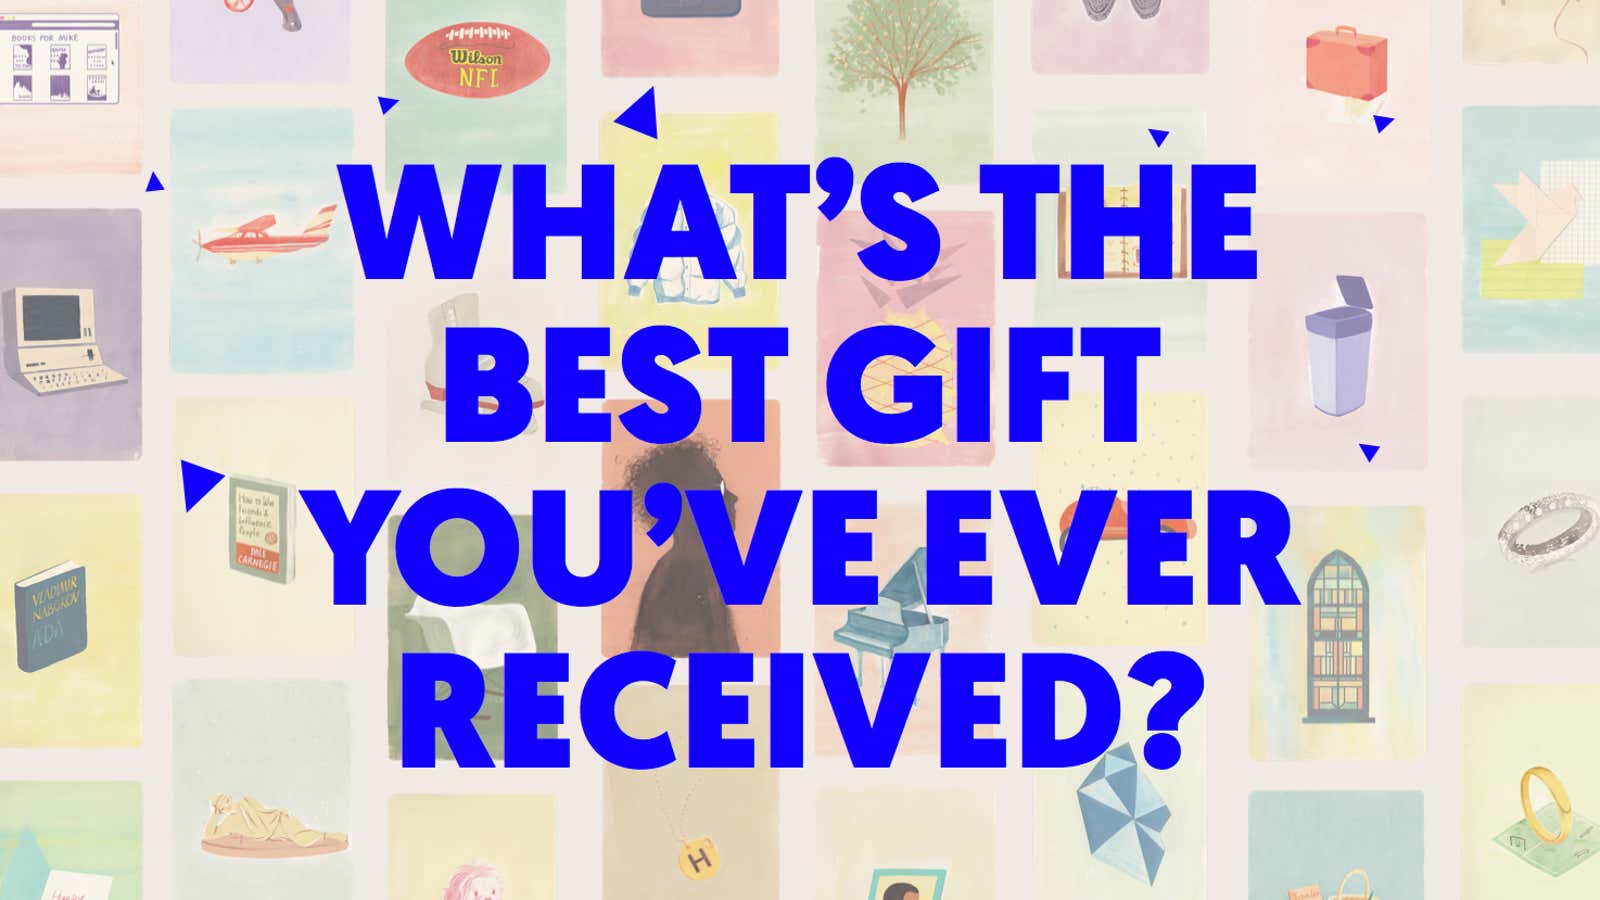 Presenting Quartz’s 2015 holiday gift guide